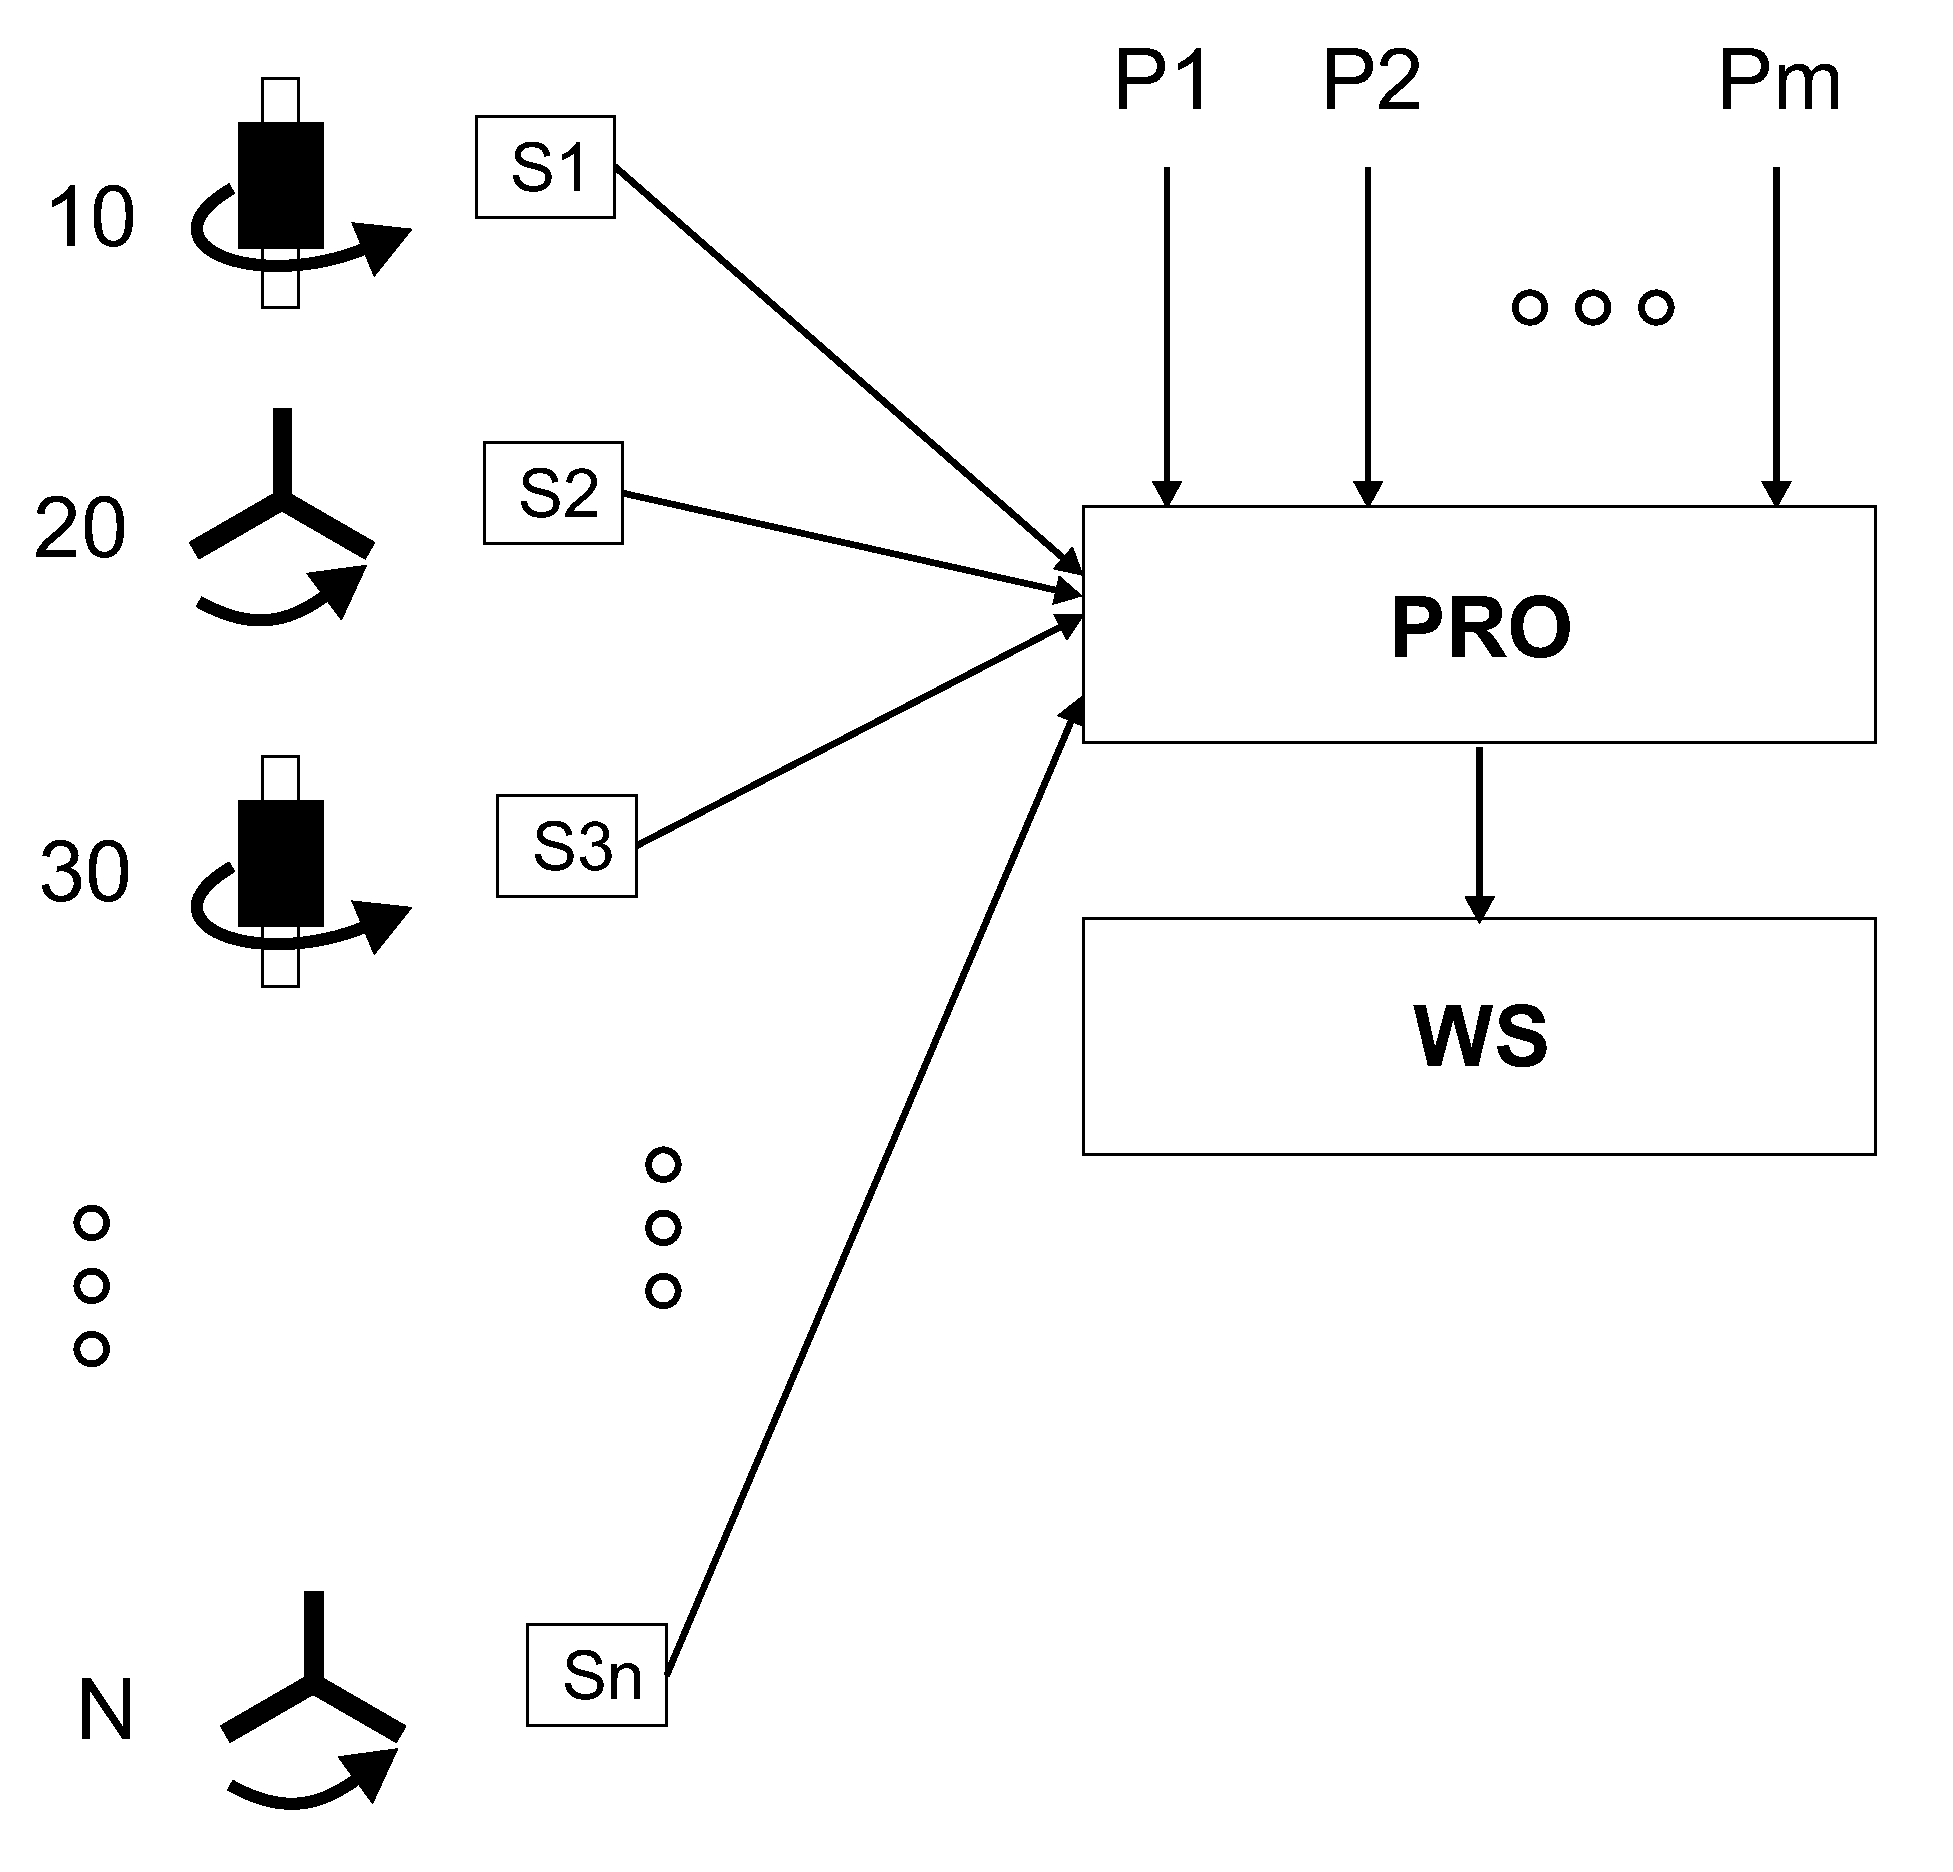 Detection system for detection of damages on rotating components of components of aircraft and method of operating such a detection system